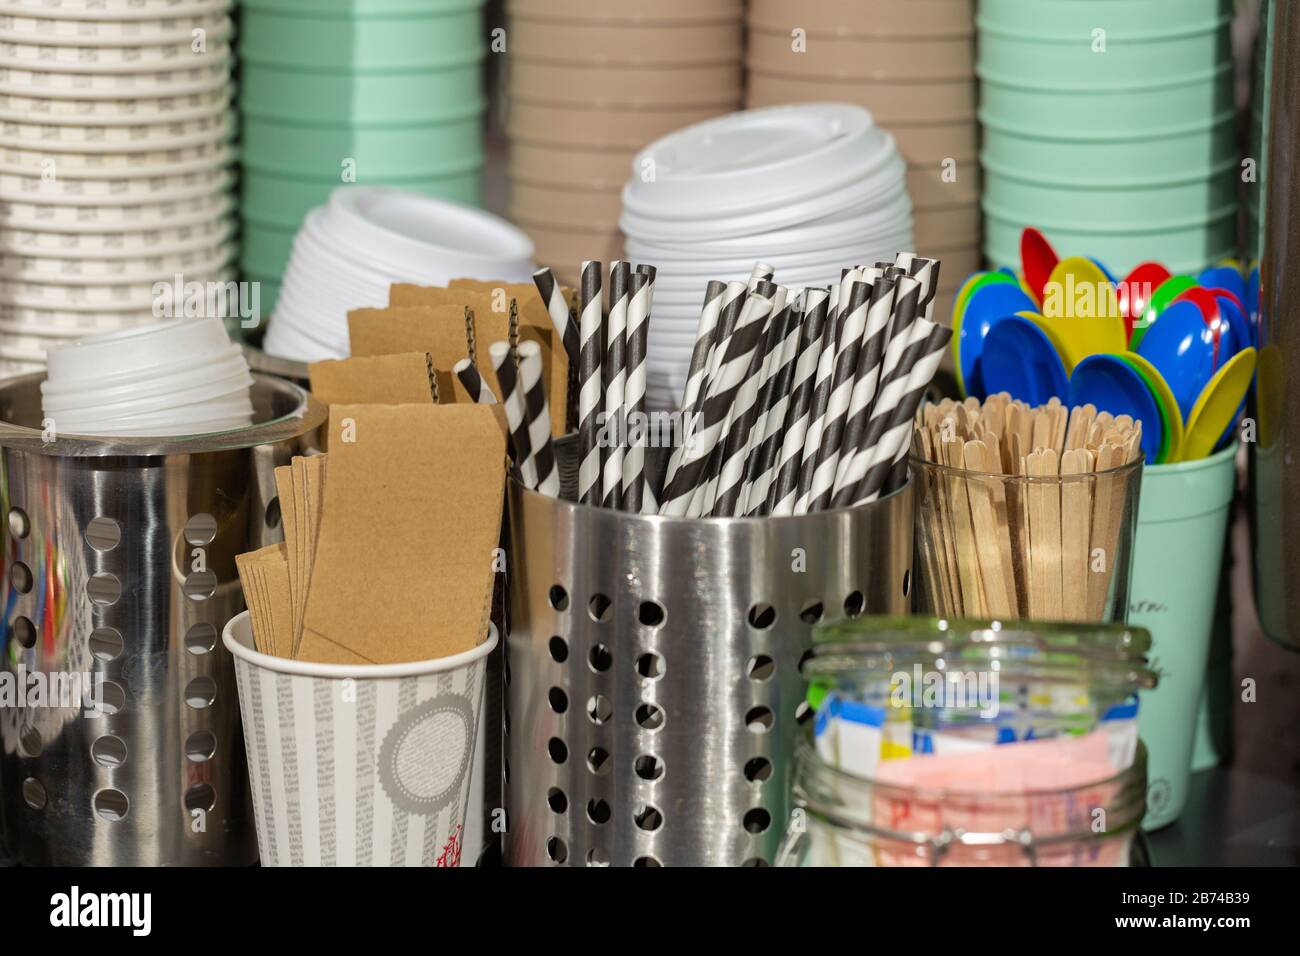 Want some coffee to go? The equipment you need is there: Striped drinking straws, coffee cups, lids, wooden sticks, plastic spoons. In a café. Stock Photo